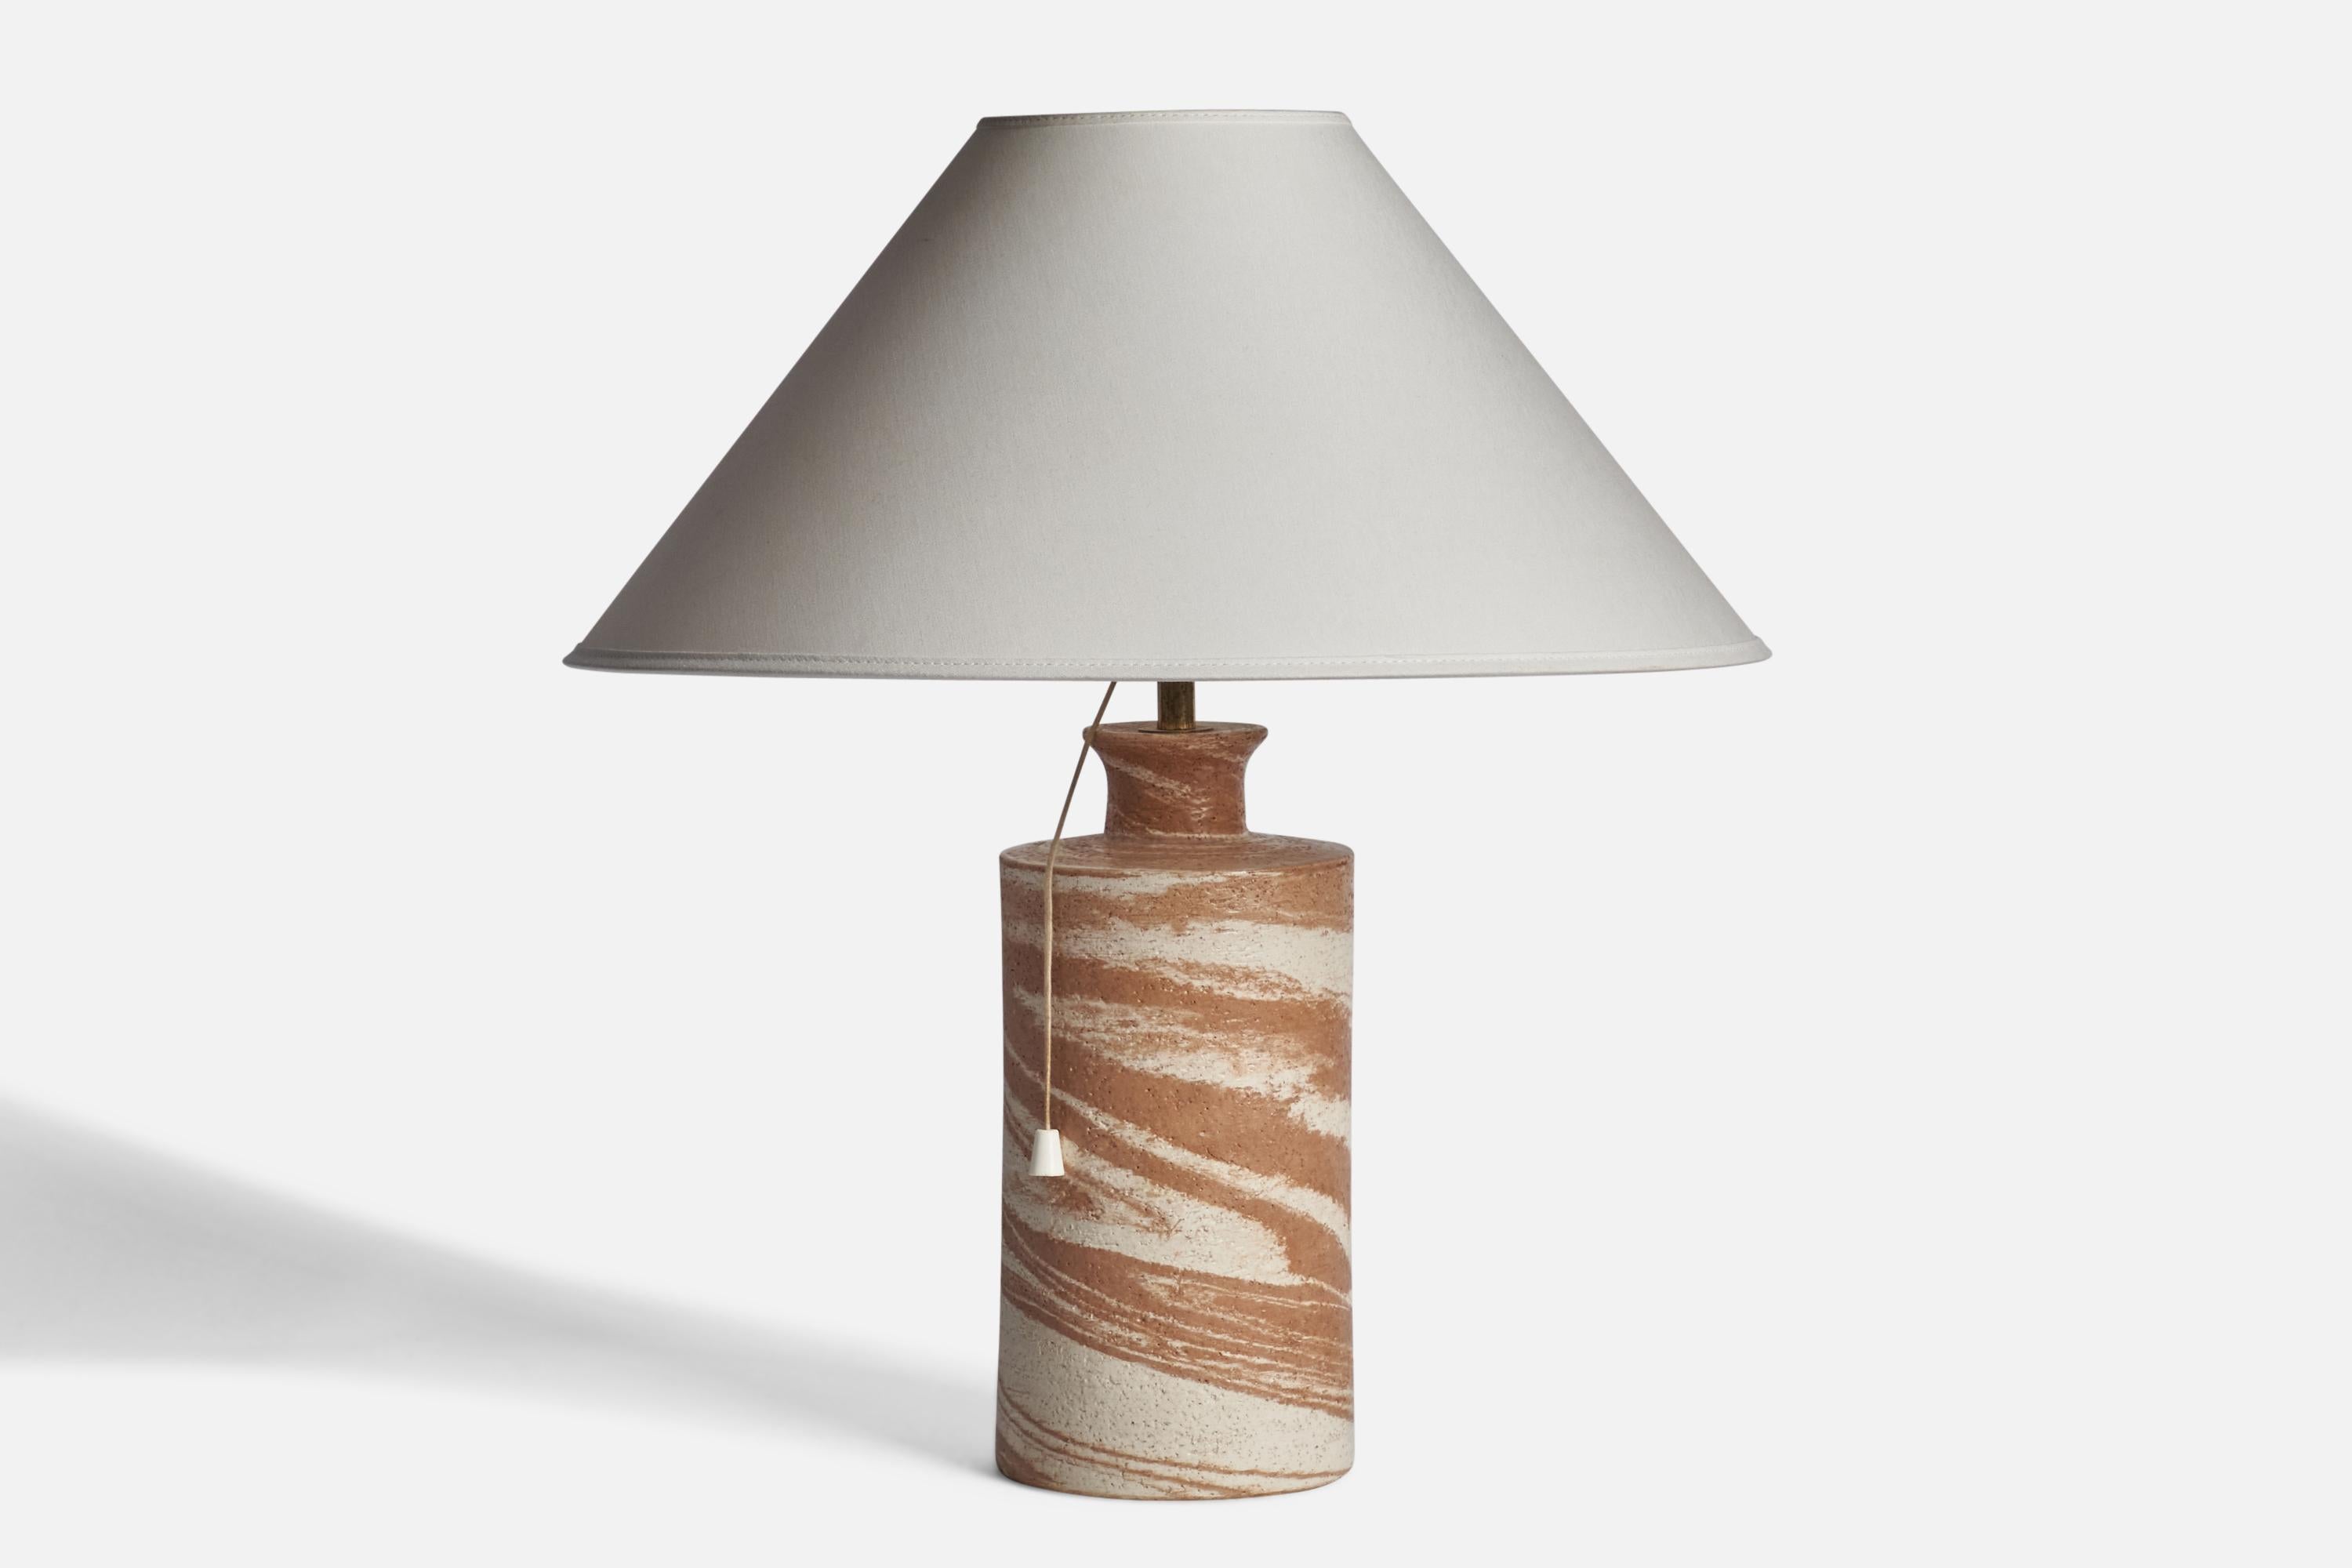 A pink and off-white glazed stoneware table lamp designed and produced by Bitossi, Sweden, 1960s.

Dimensions of Lamp (inches): 13.25” H x 4.75” Diameter
Dimensions of Shade (inches): 4.5” Top Diameter x 16” Bottom Diameter x 7.25” H
Dimensions of